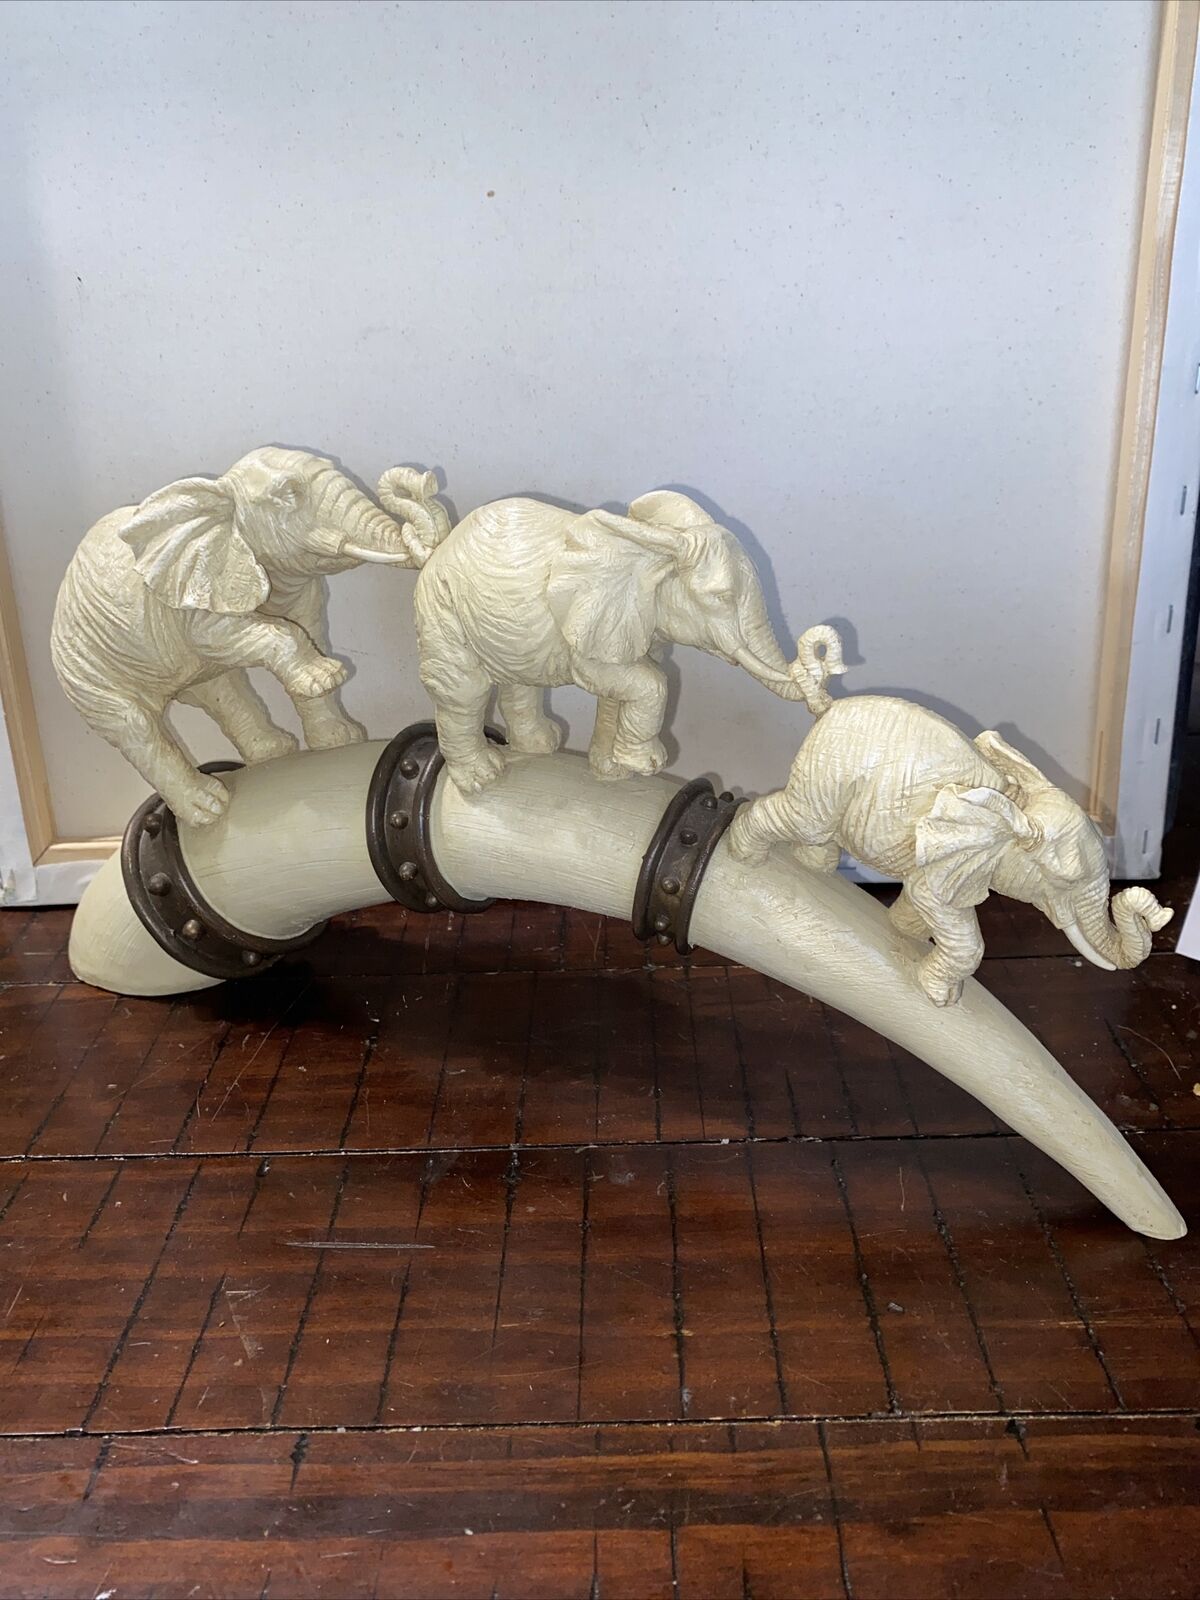 Preowned , CARVED CASTING OF 3 LUCKY ELEPHANTS OVER TUSK BRIDGE, VINTAGE